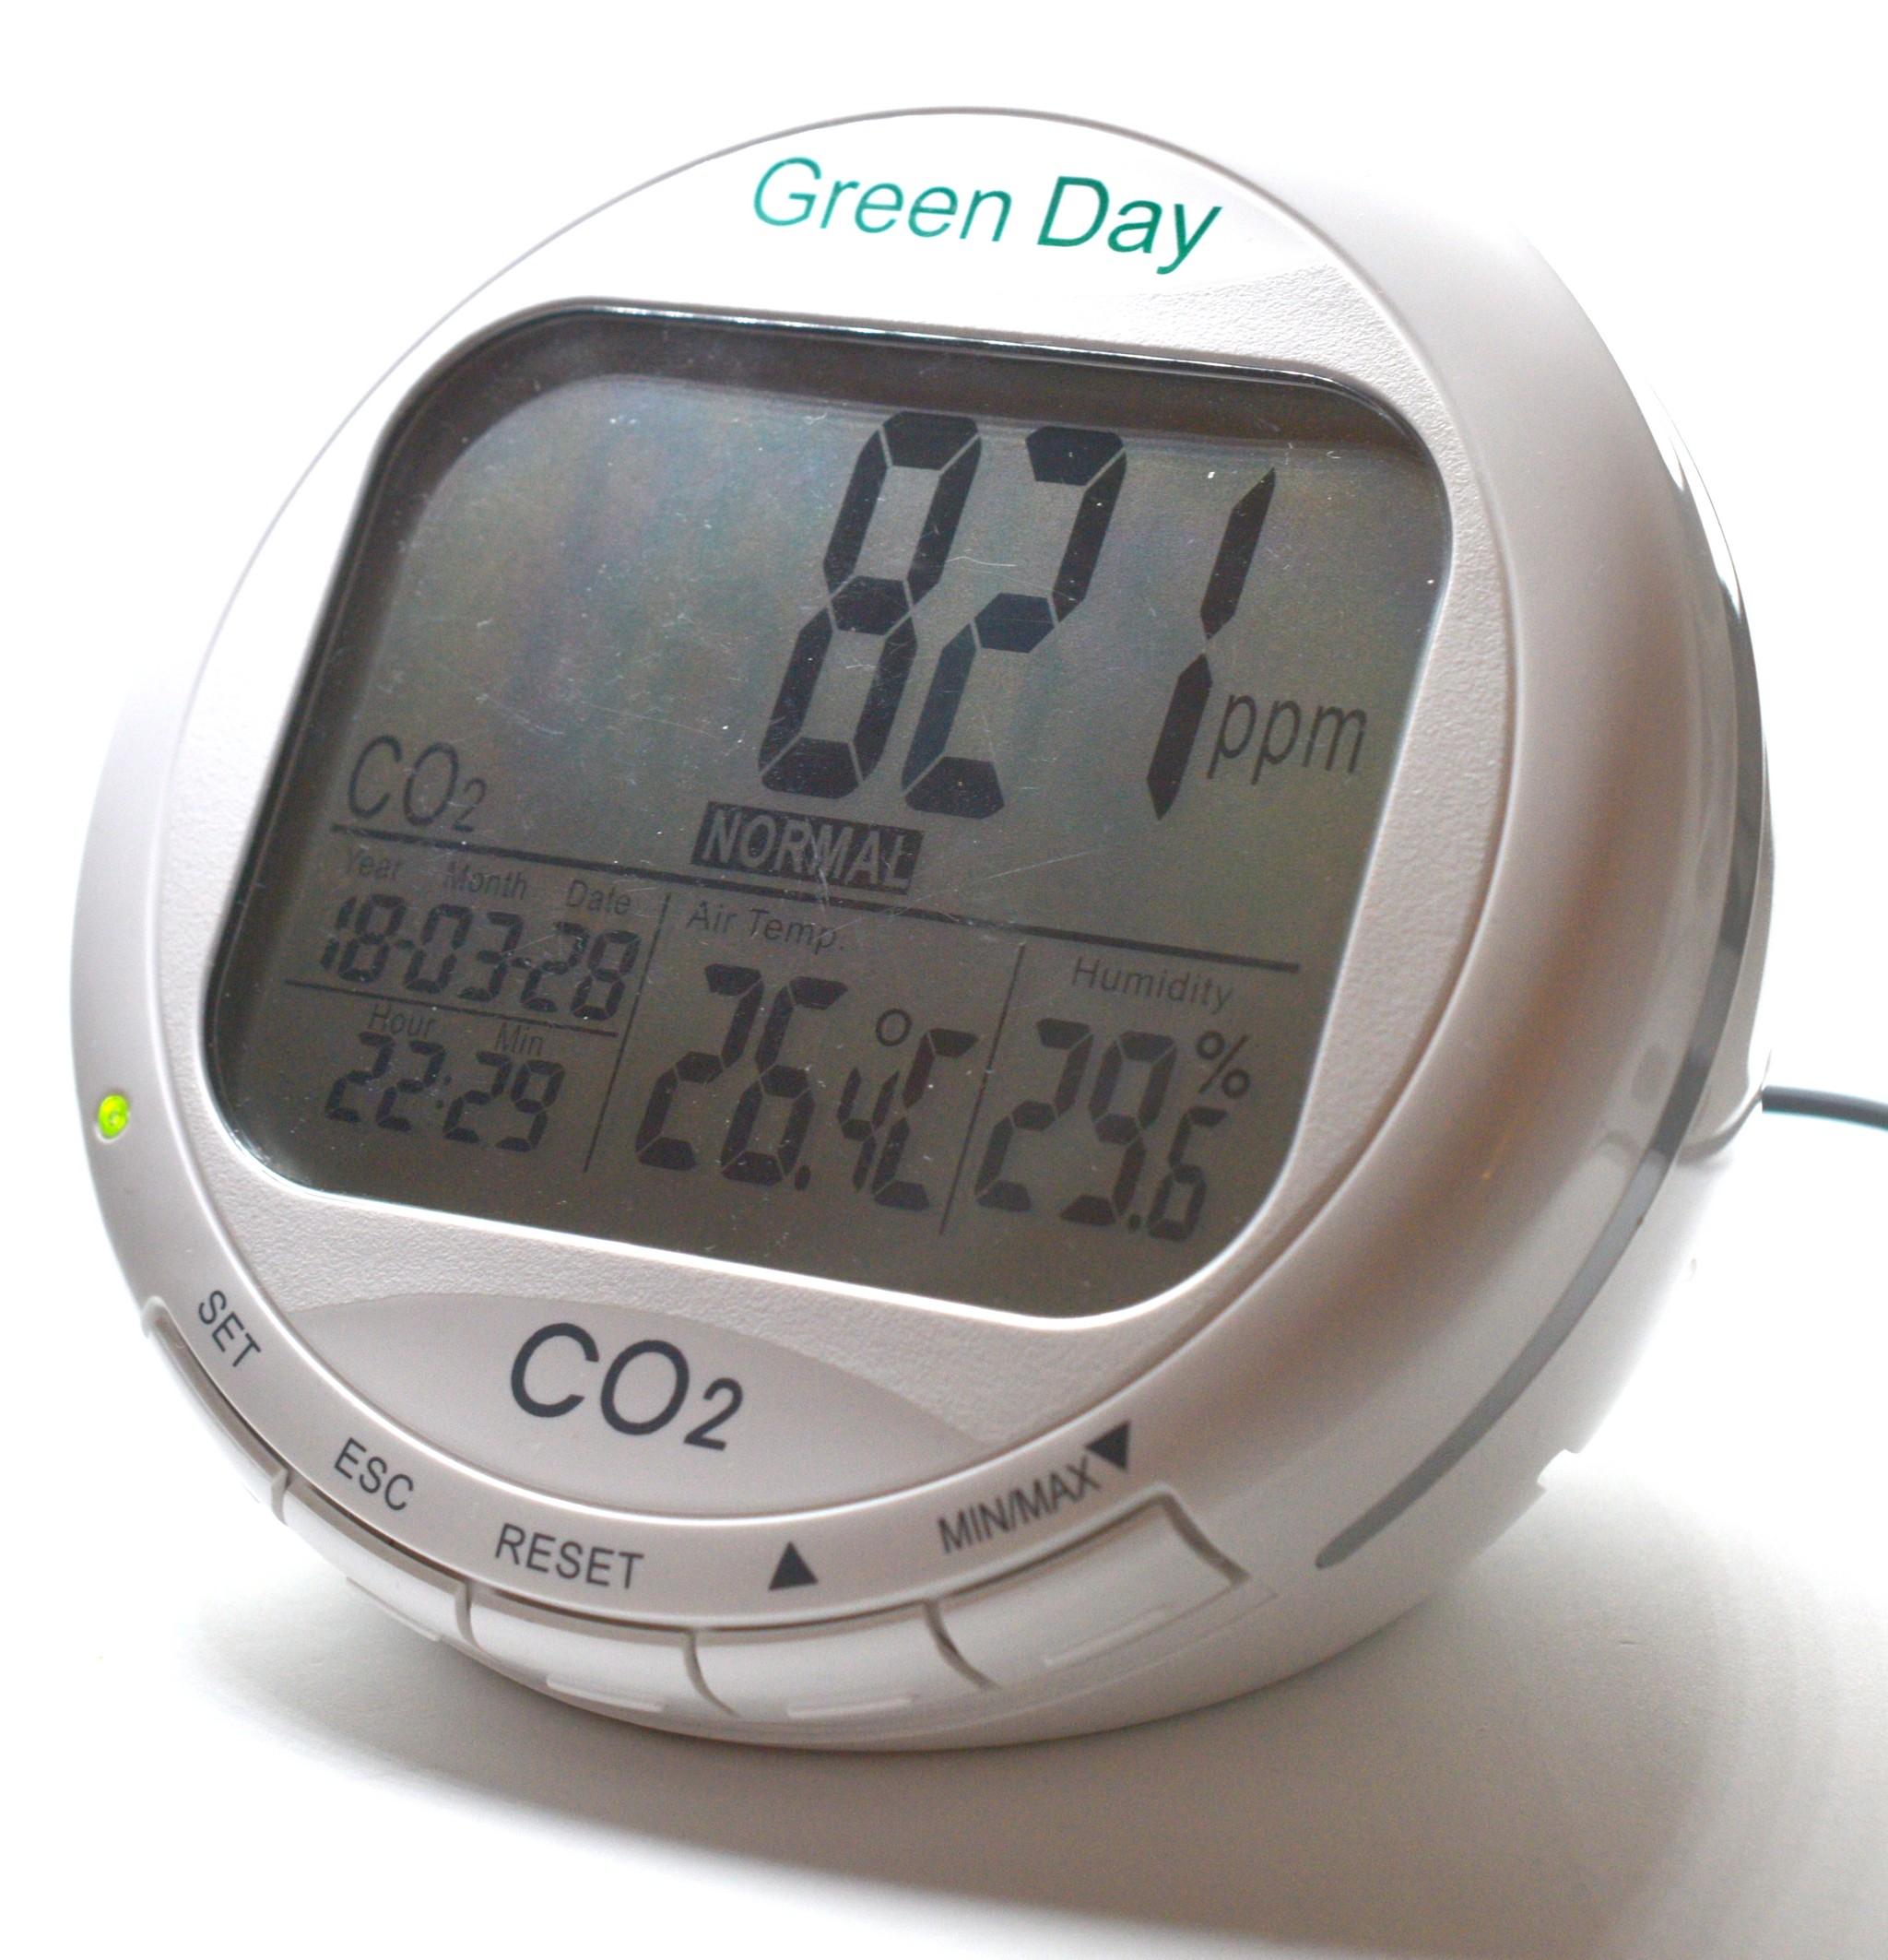 Green Day CO2 Monitor –